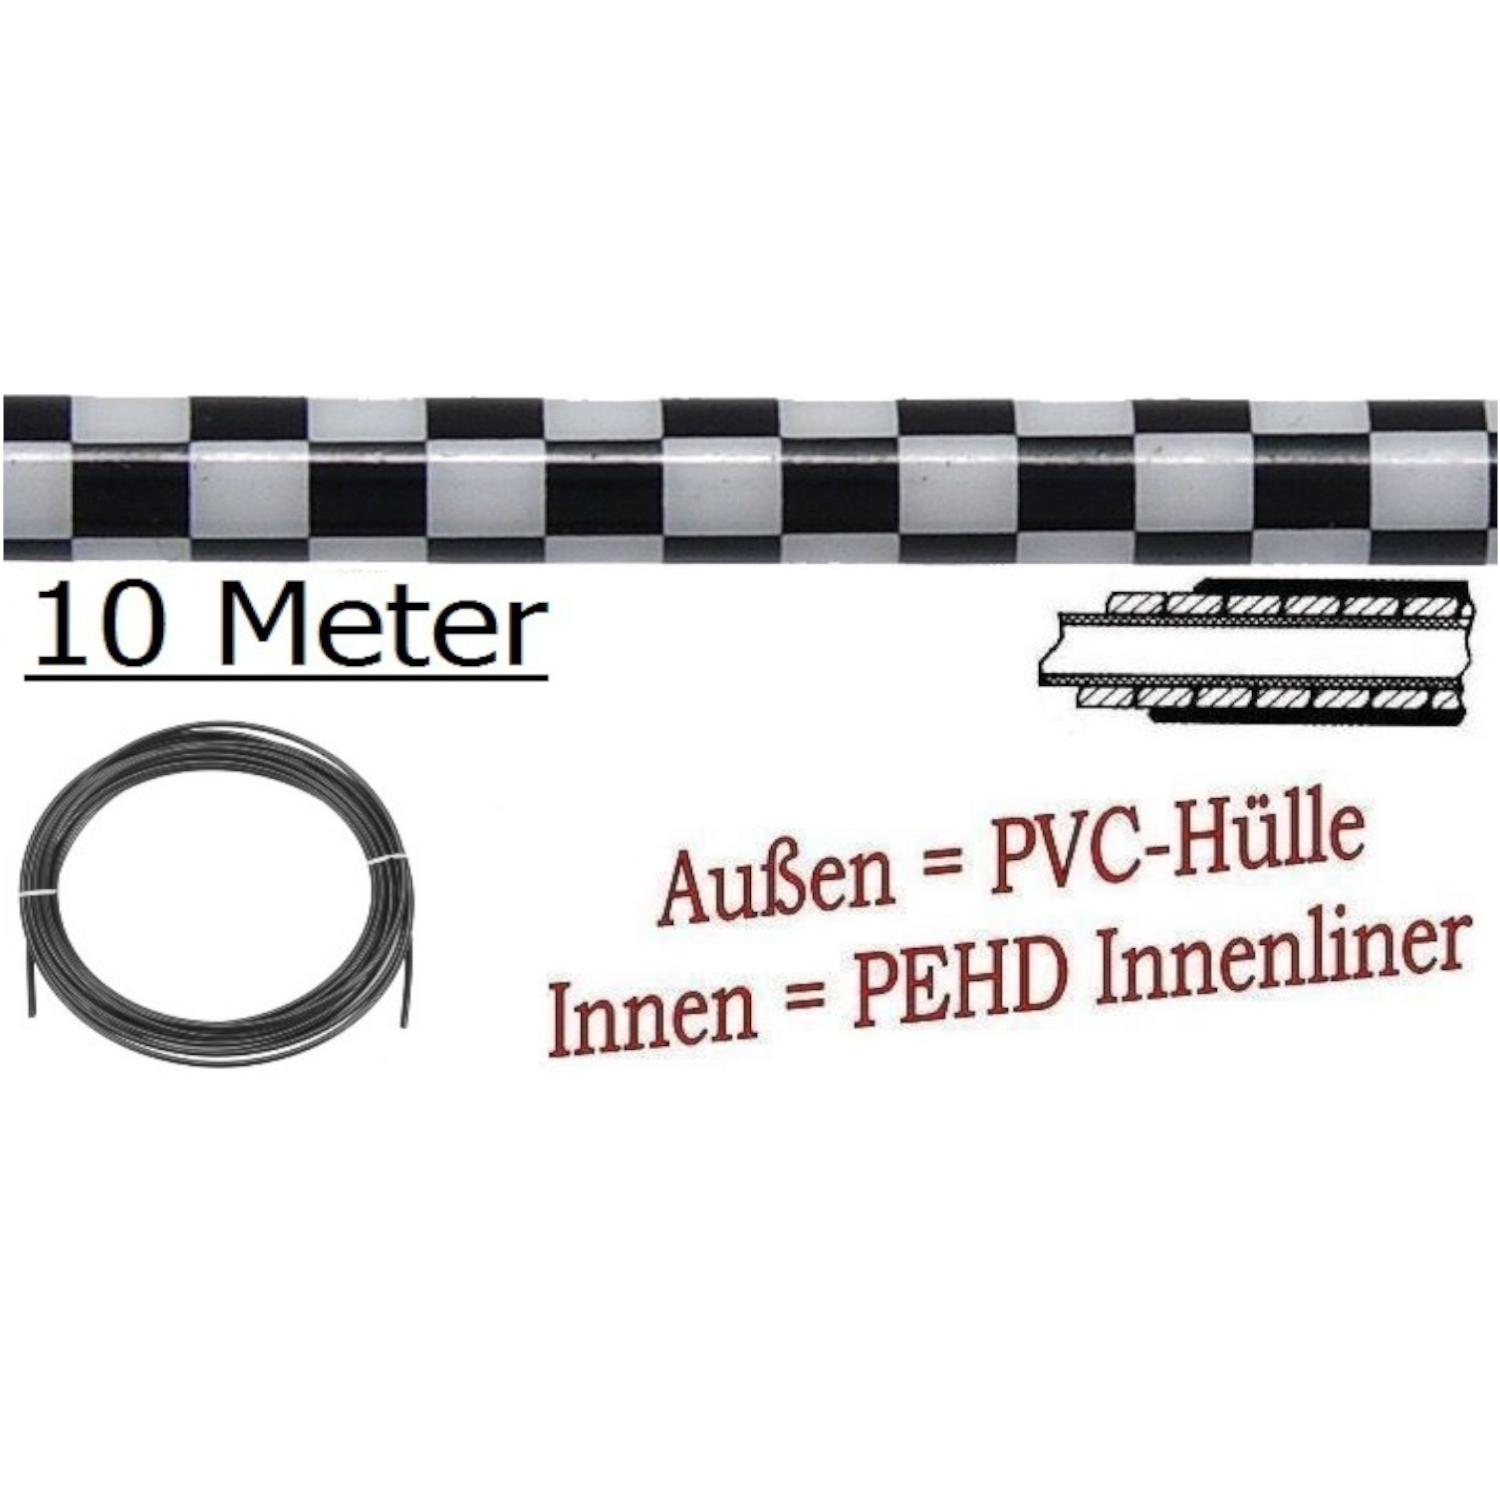 BREMS-Hülle 10 m Rolle DT2115001, CHESS mit PE-HD Innenliner